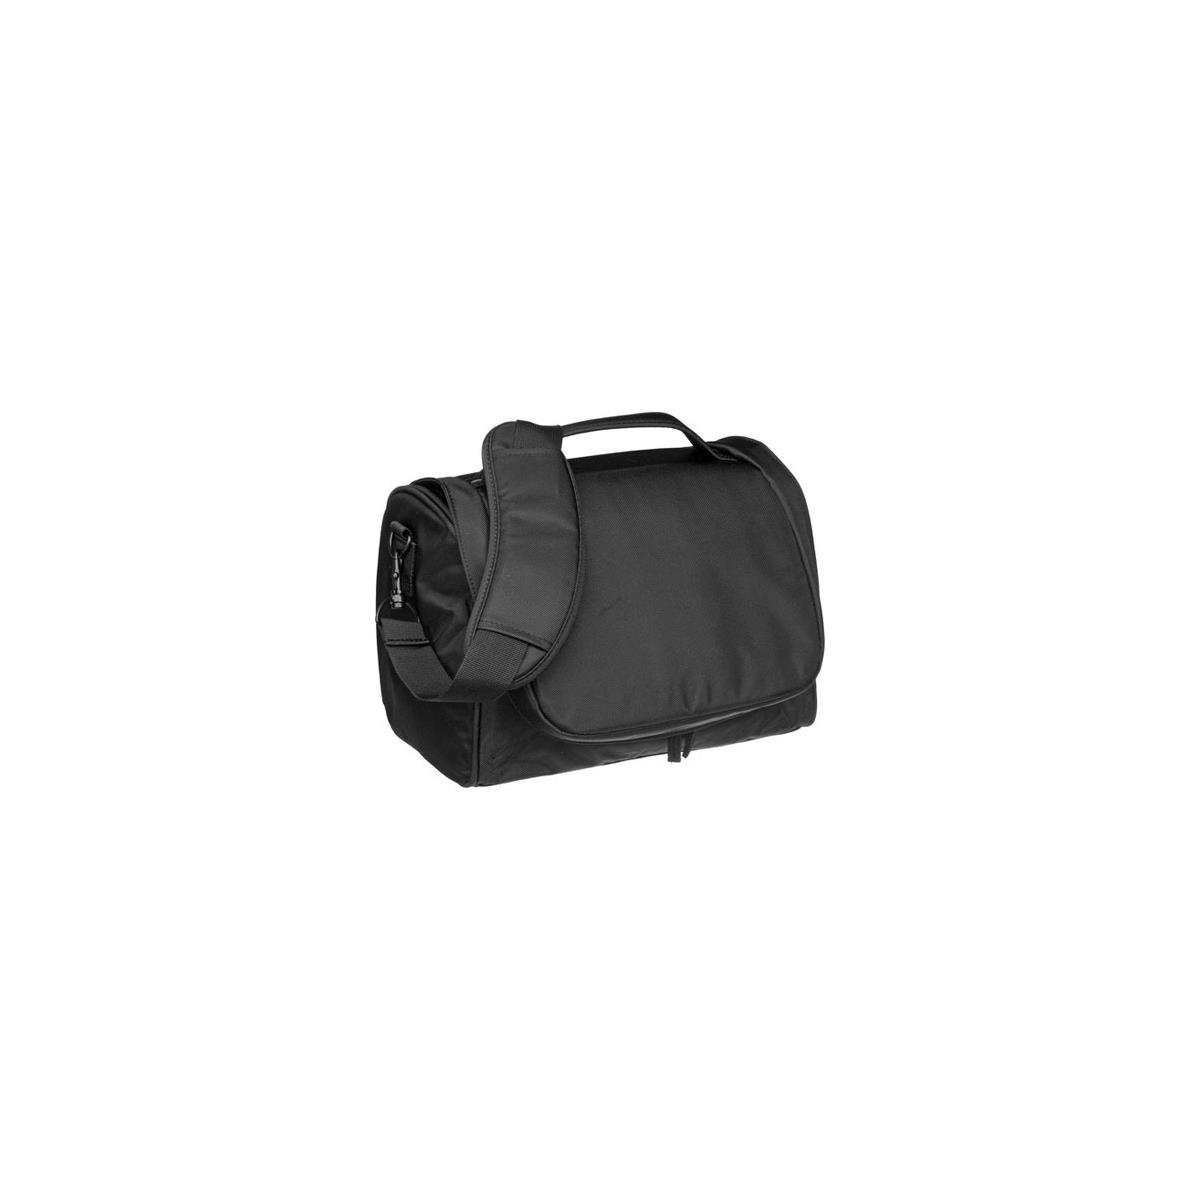 Image of Fujitsu ScanSnap Carrying Case for Fujitsu S500/S510/5110/fi-5110EOX Scanners